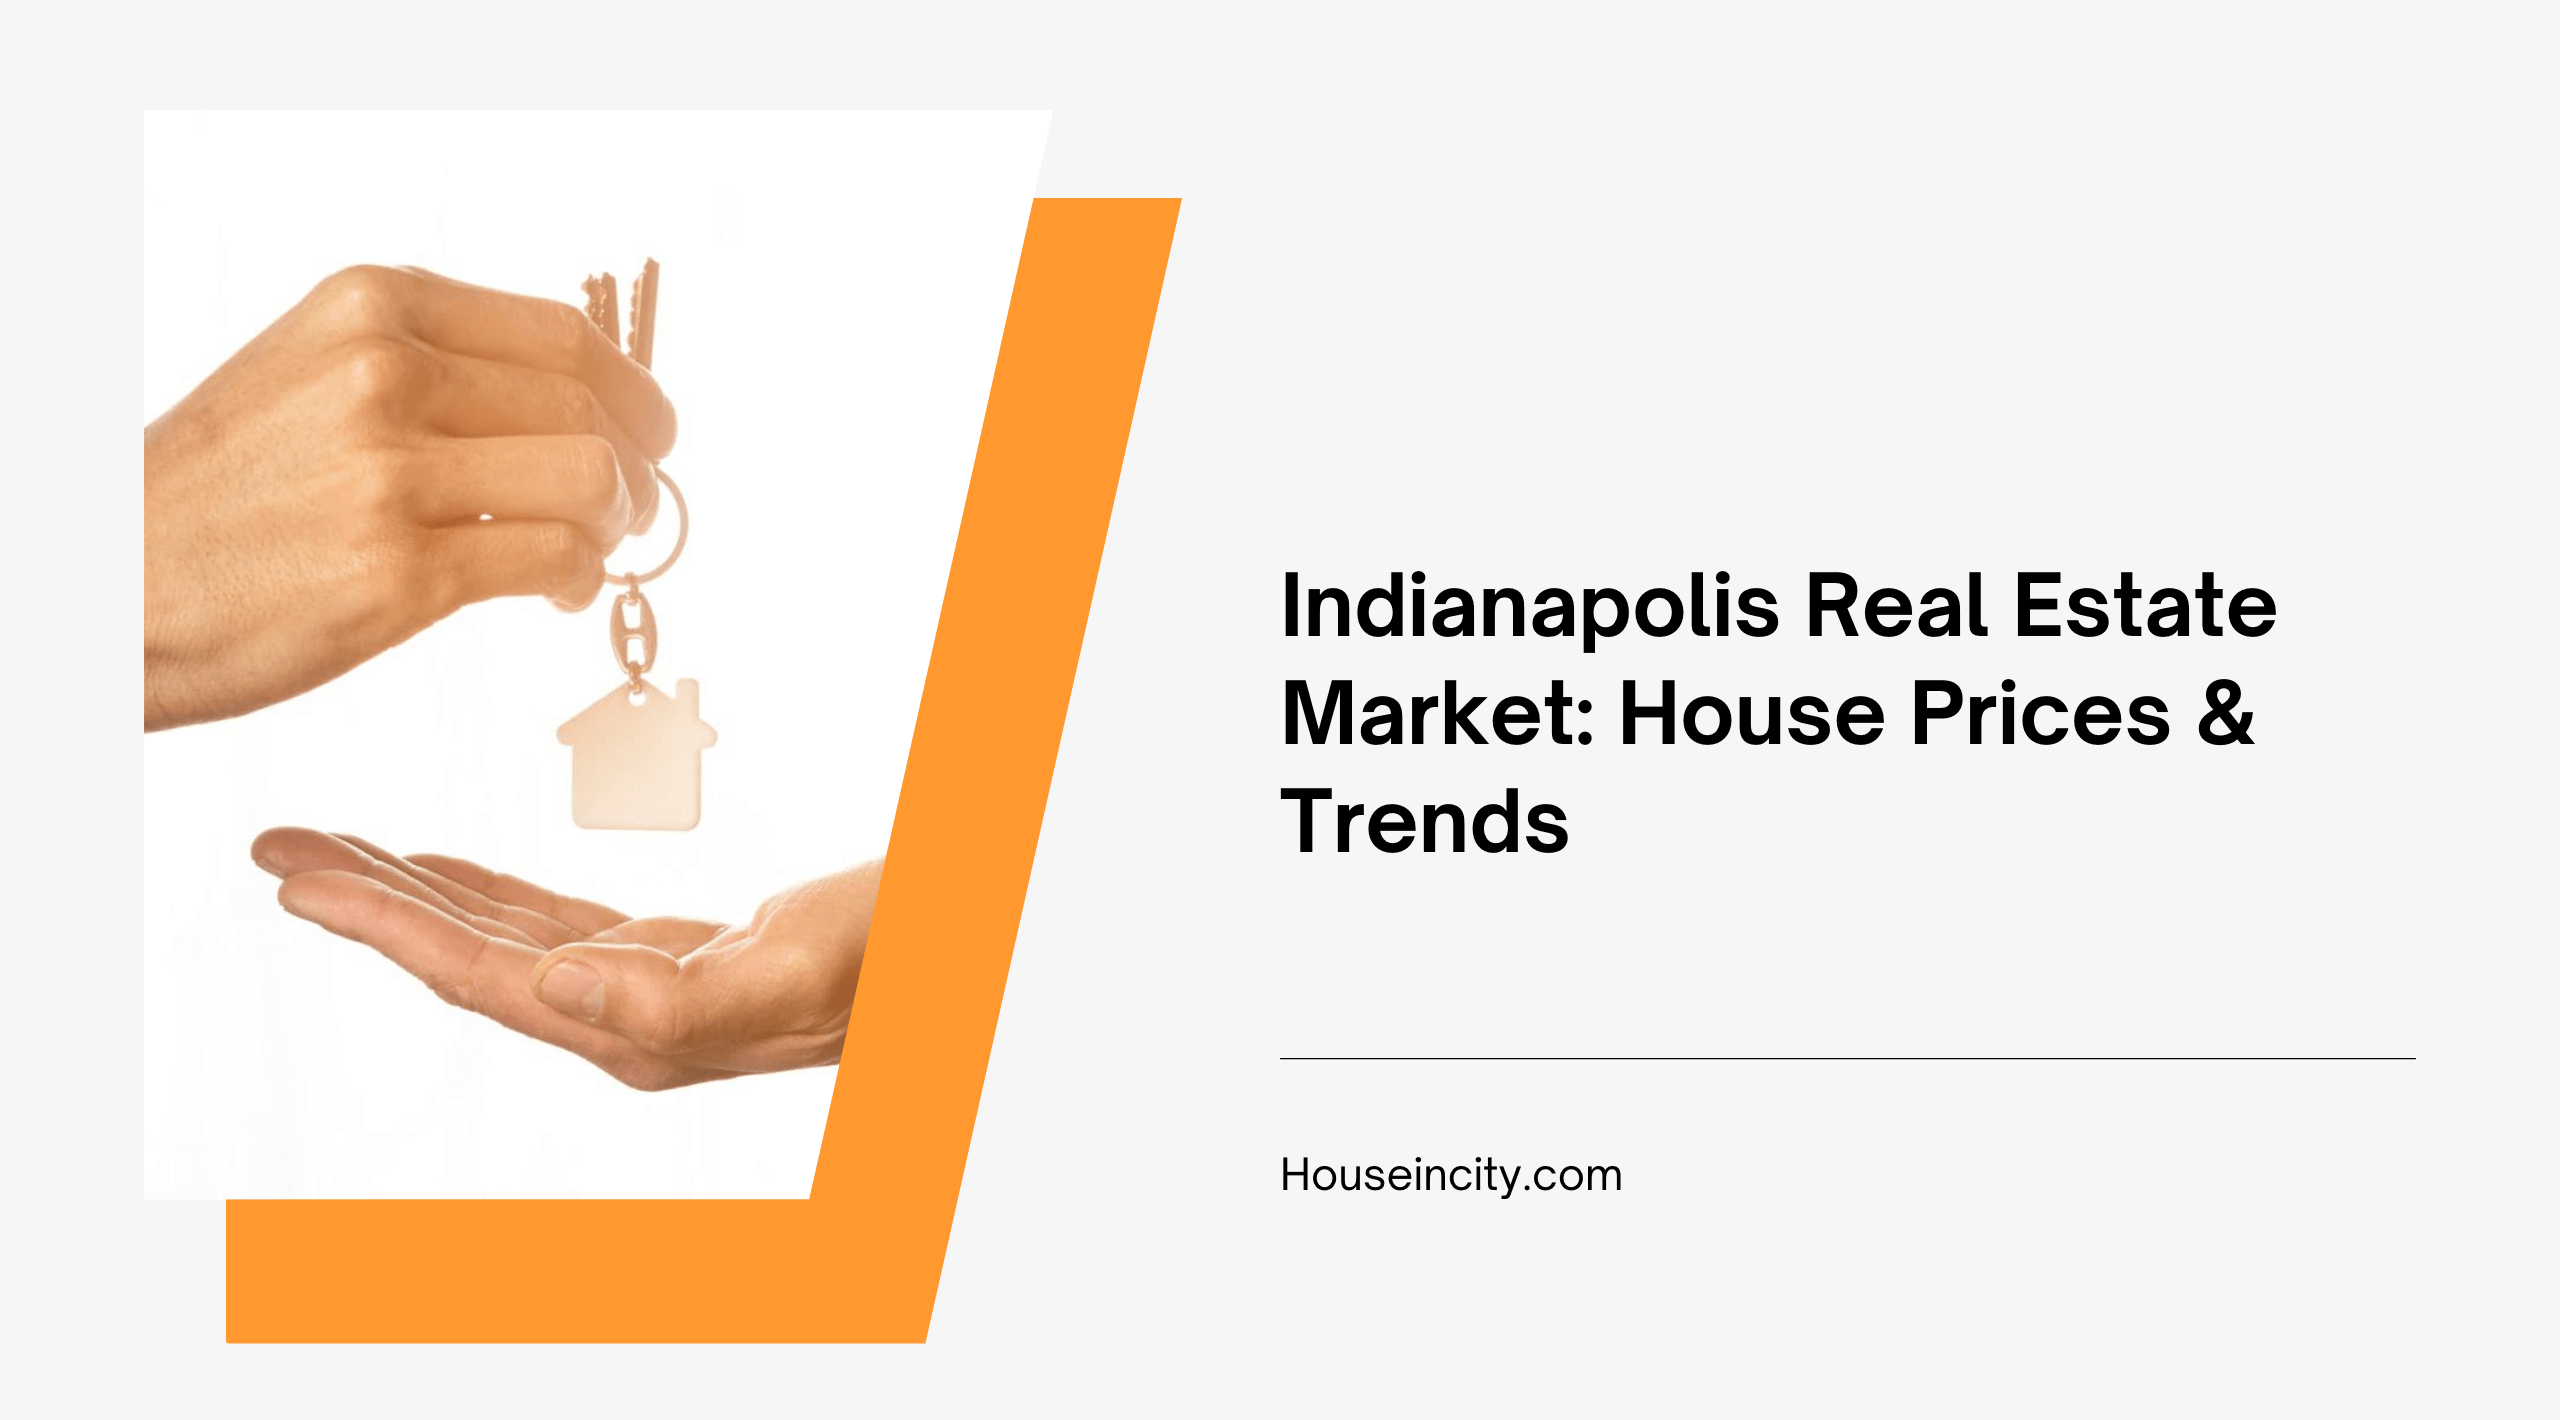 Indianapolis Real Estate Market: House Prices & Trends